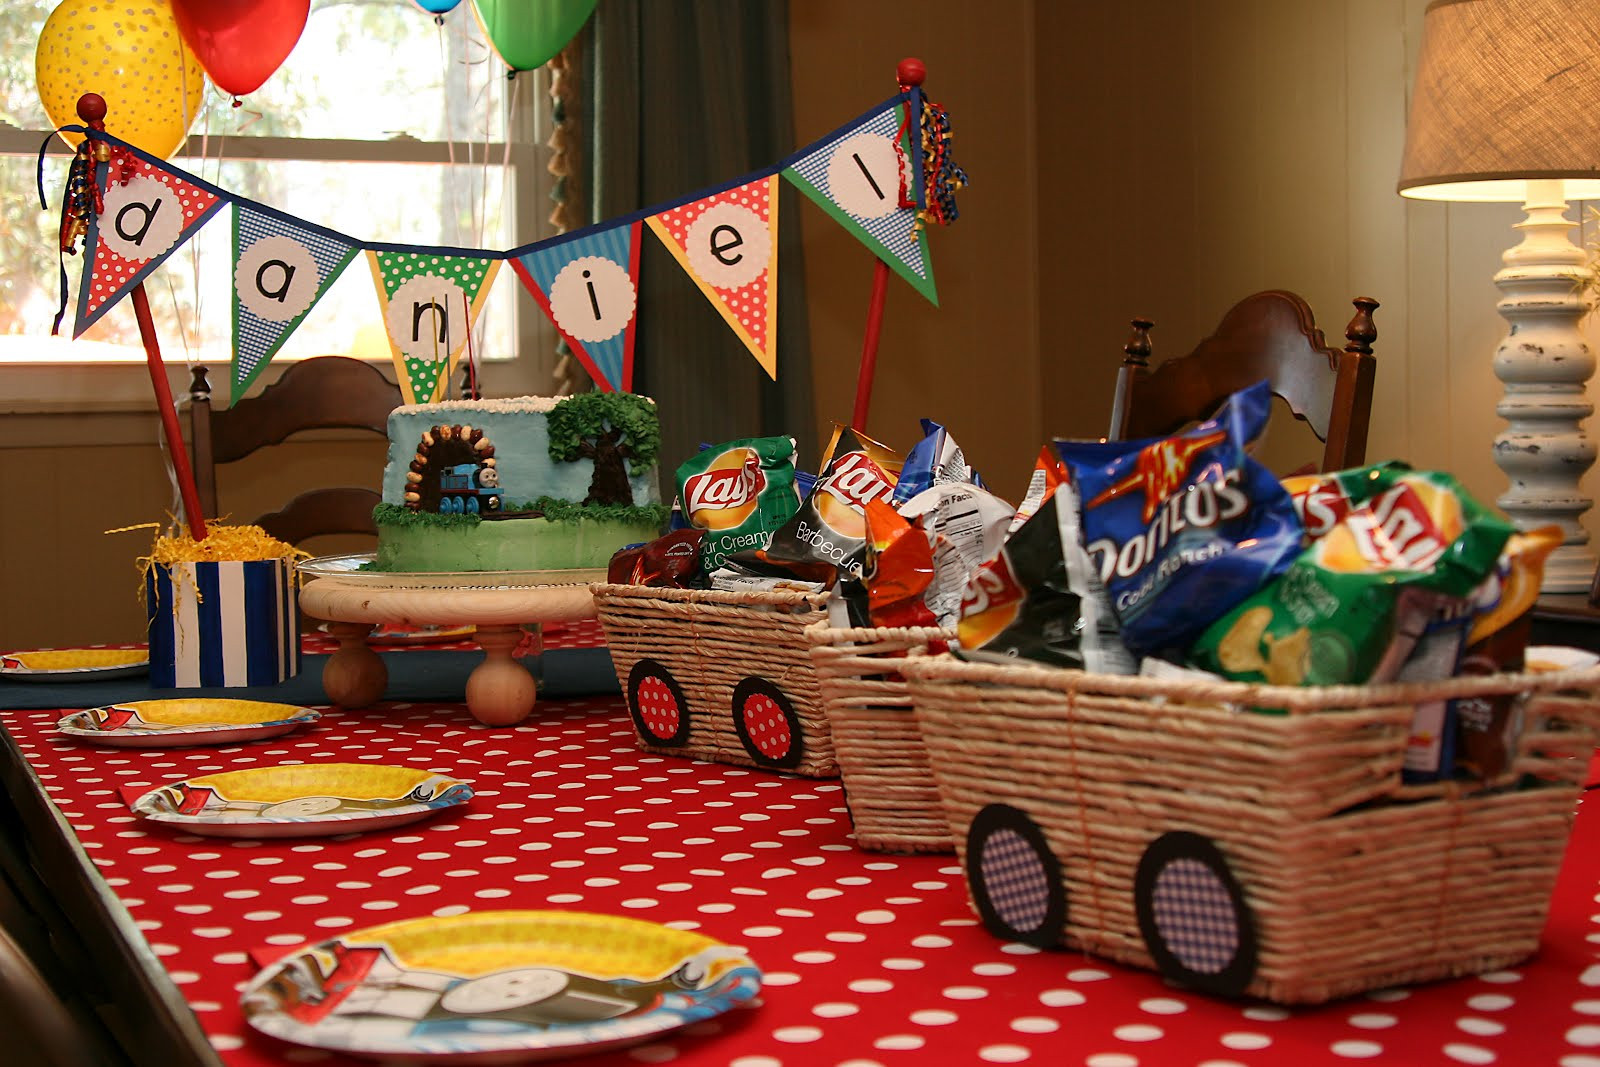 Train Birthday Party Decorations
 The Butlers Daniel s 3rd Birthday Party